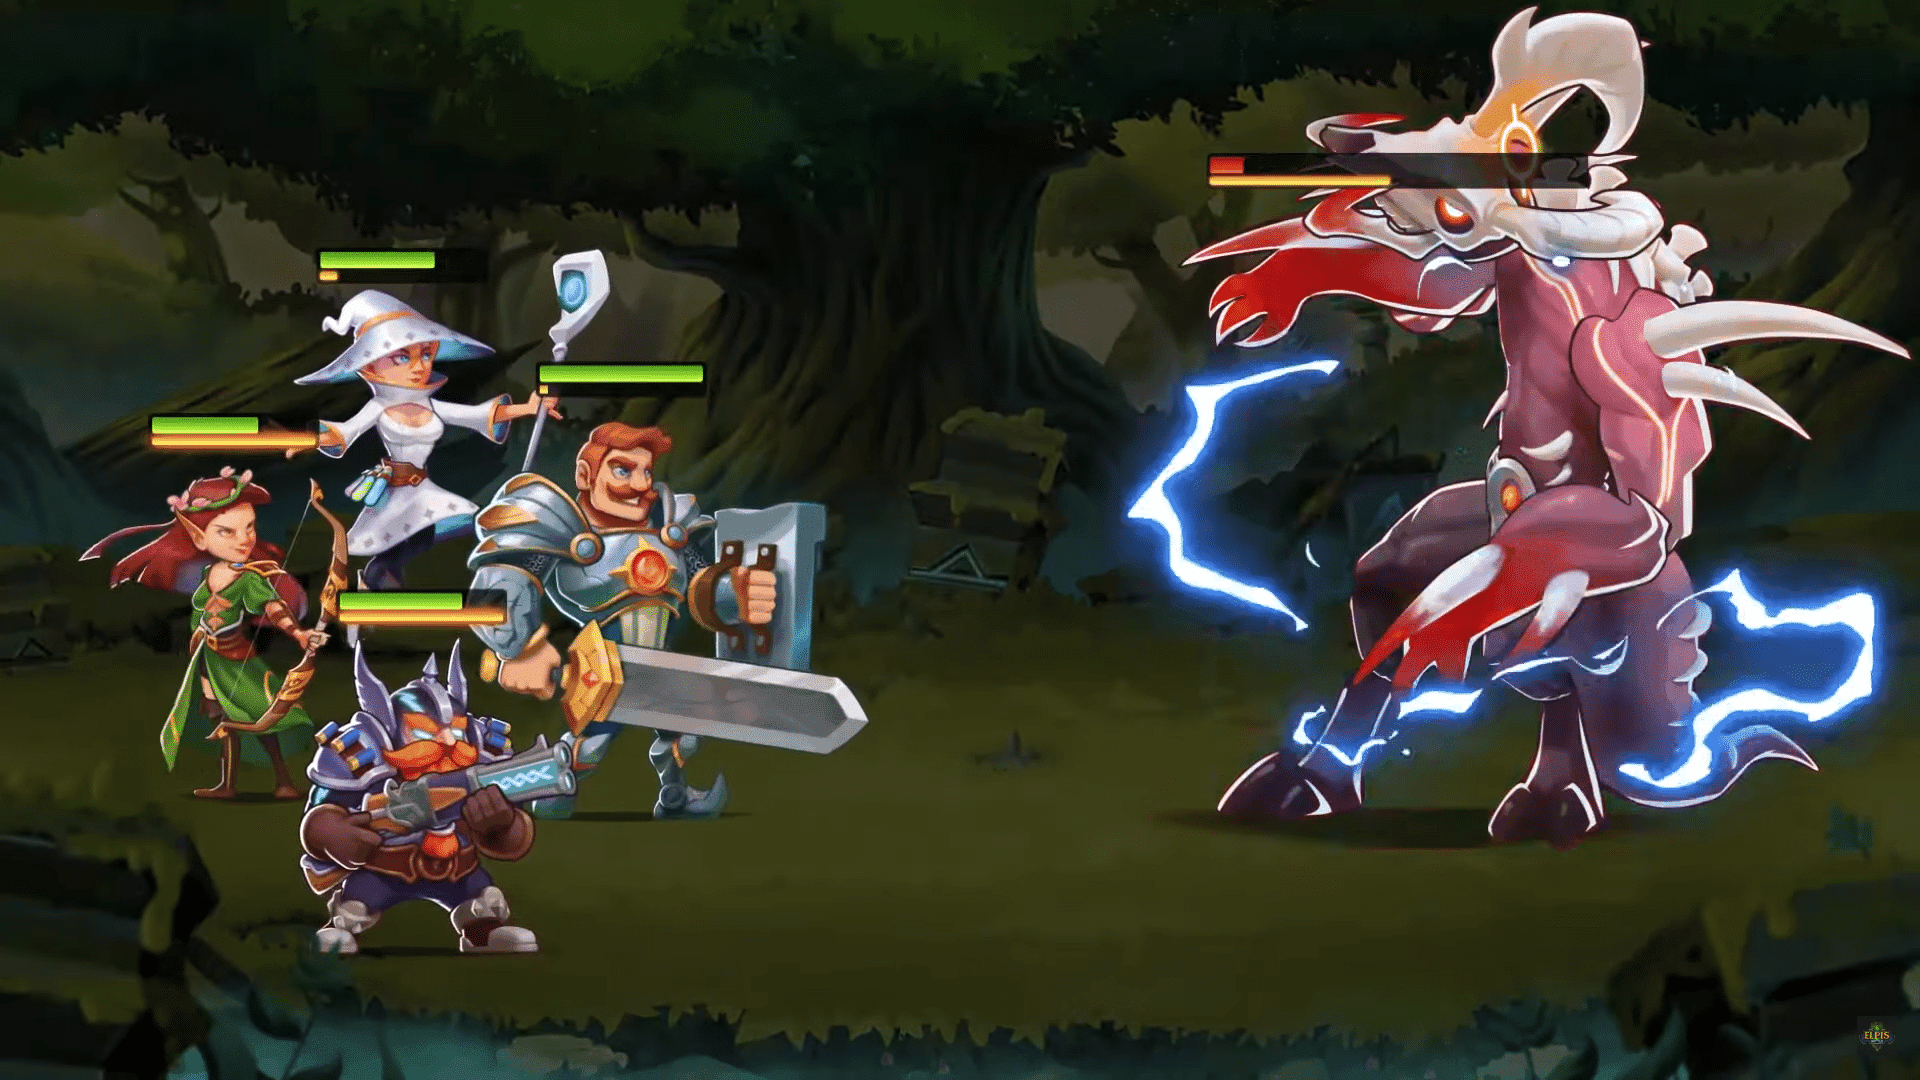 Elpis Battle, RPG NFT game, operates on the Binance Smart Chain network and is the product of two prominent game studios from Southeast Asia.